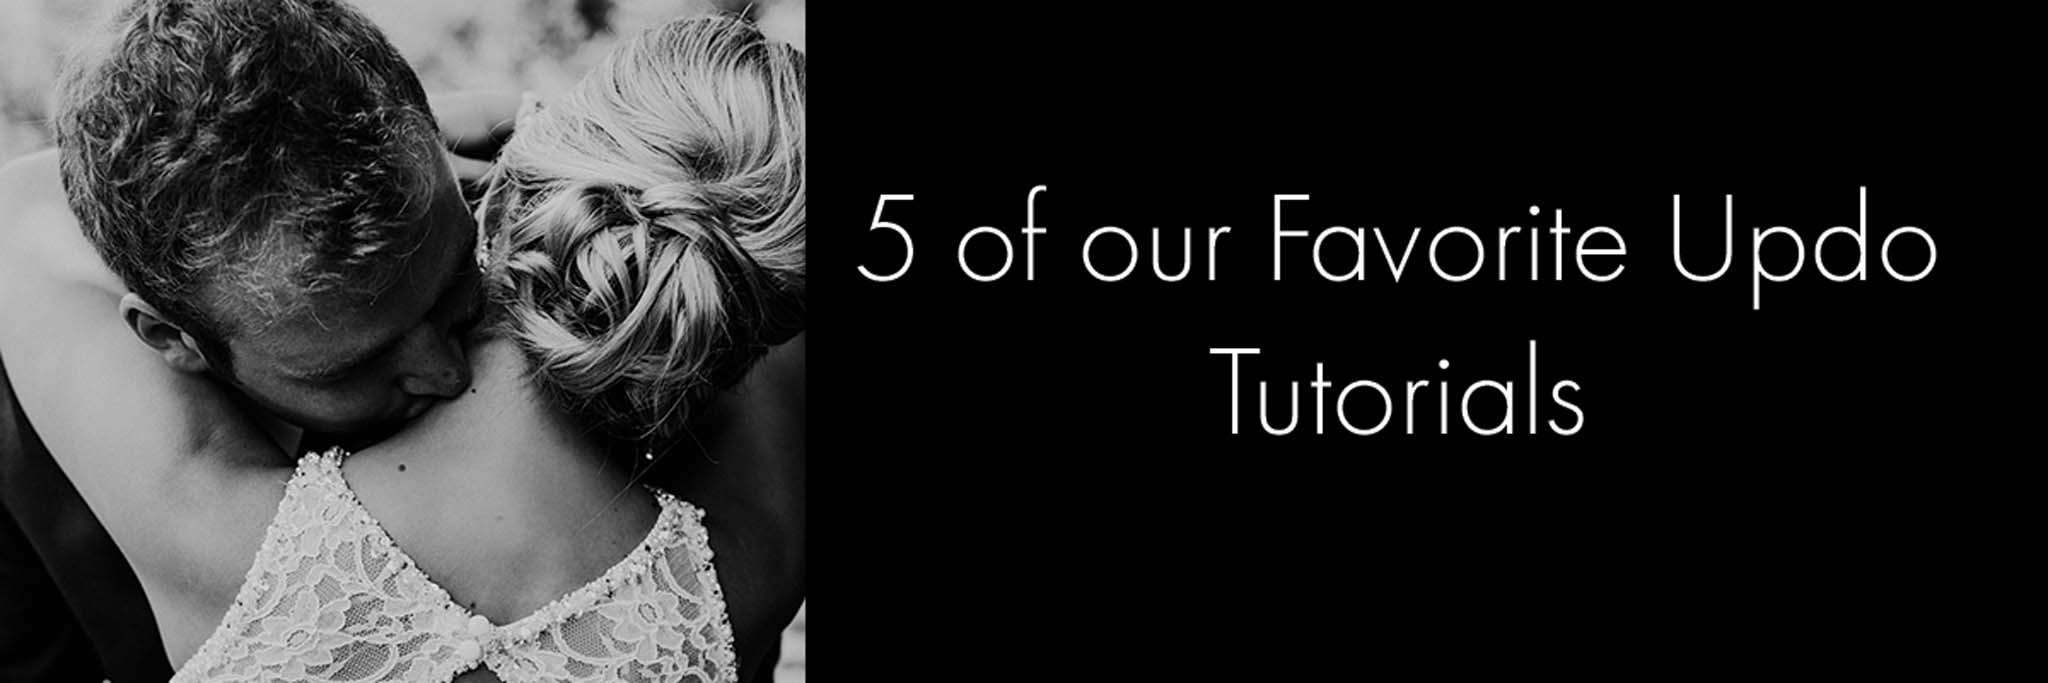 5 of our Favorite Updo Tutorials